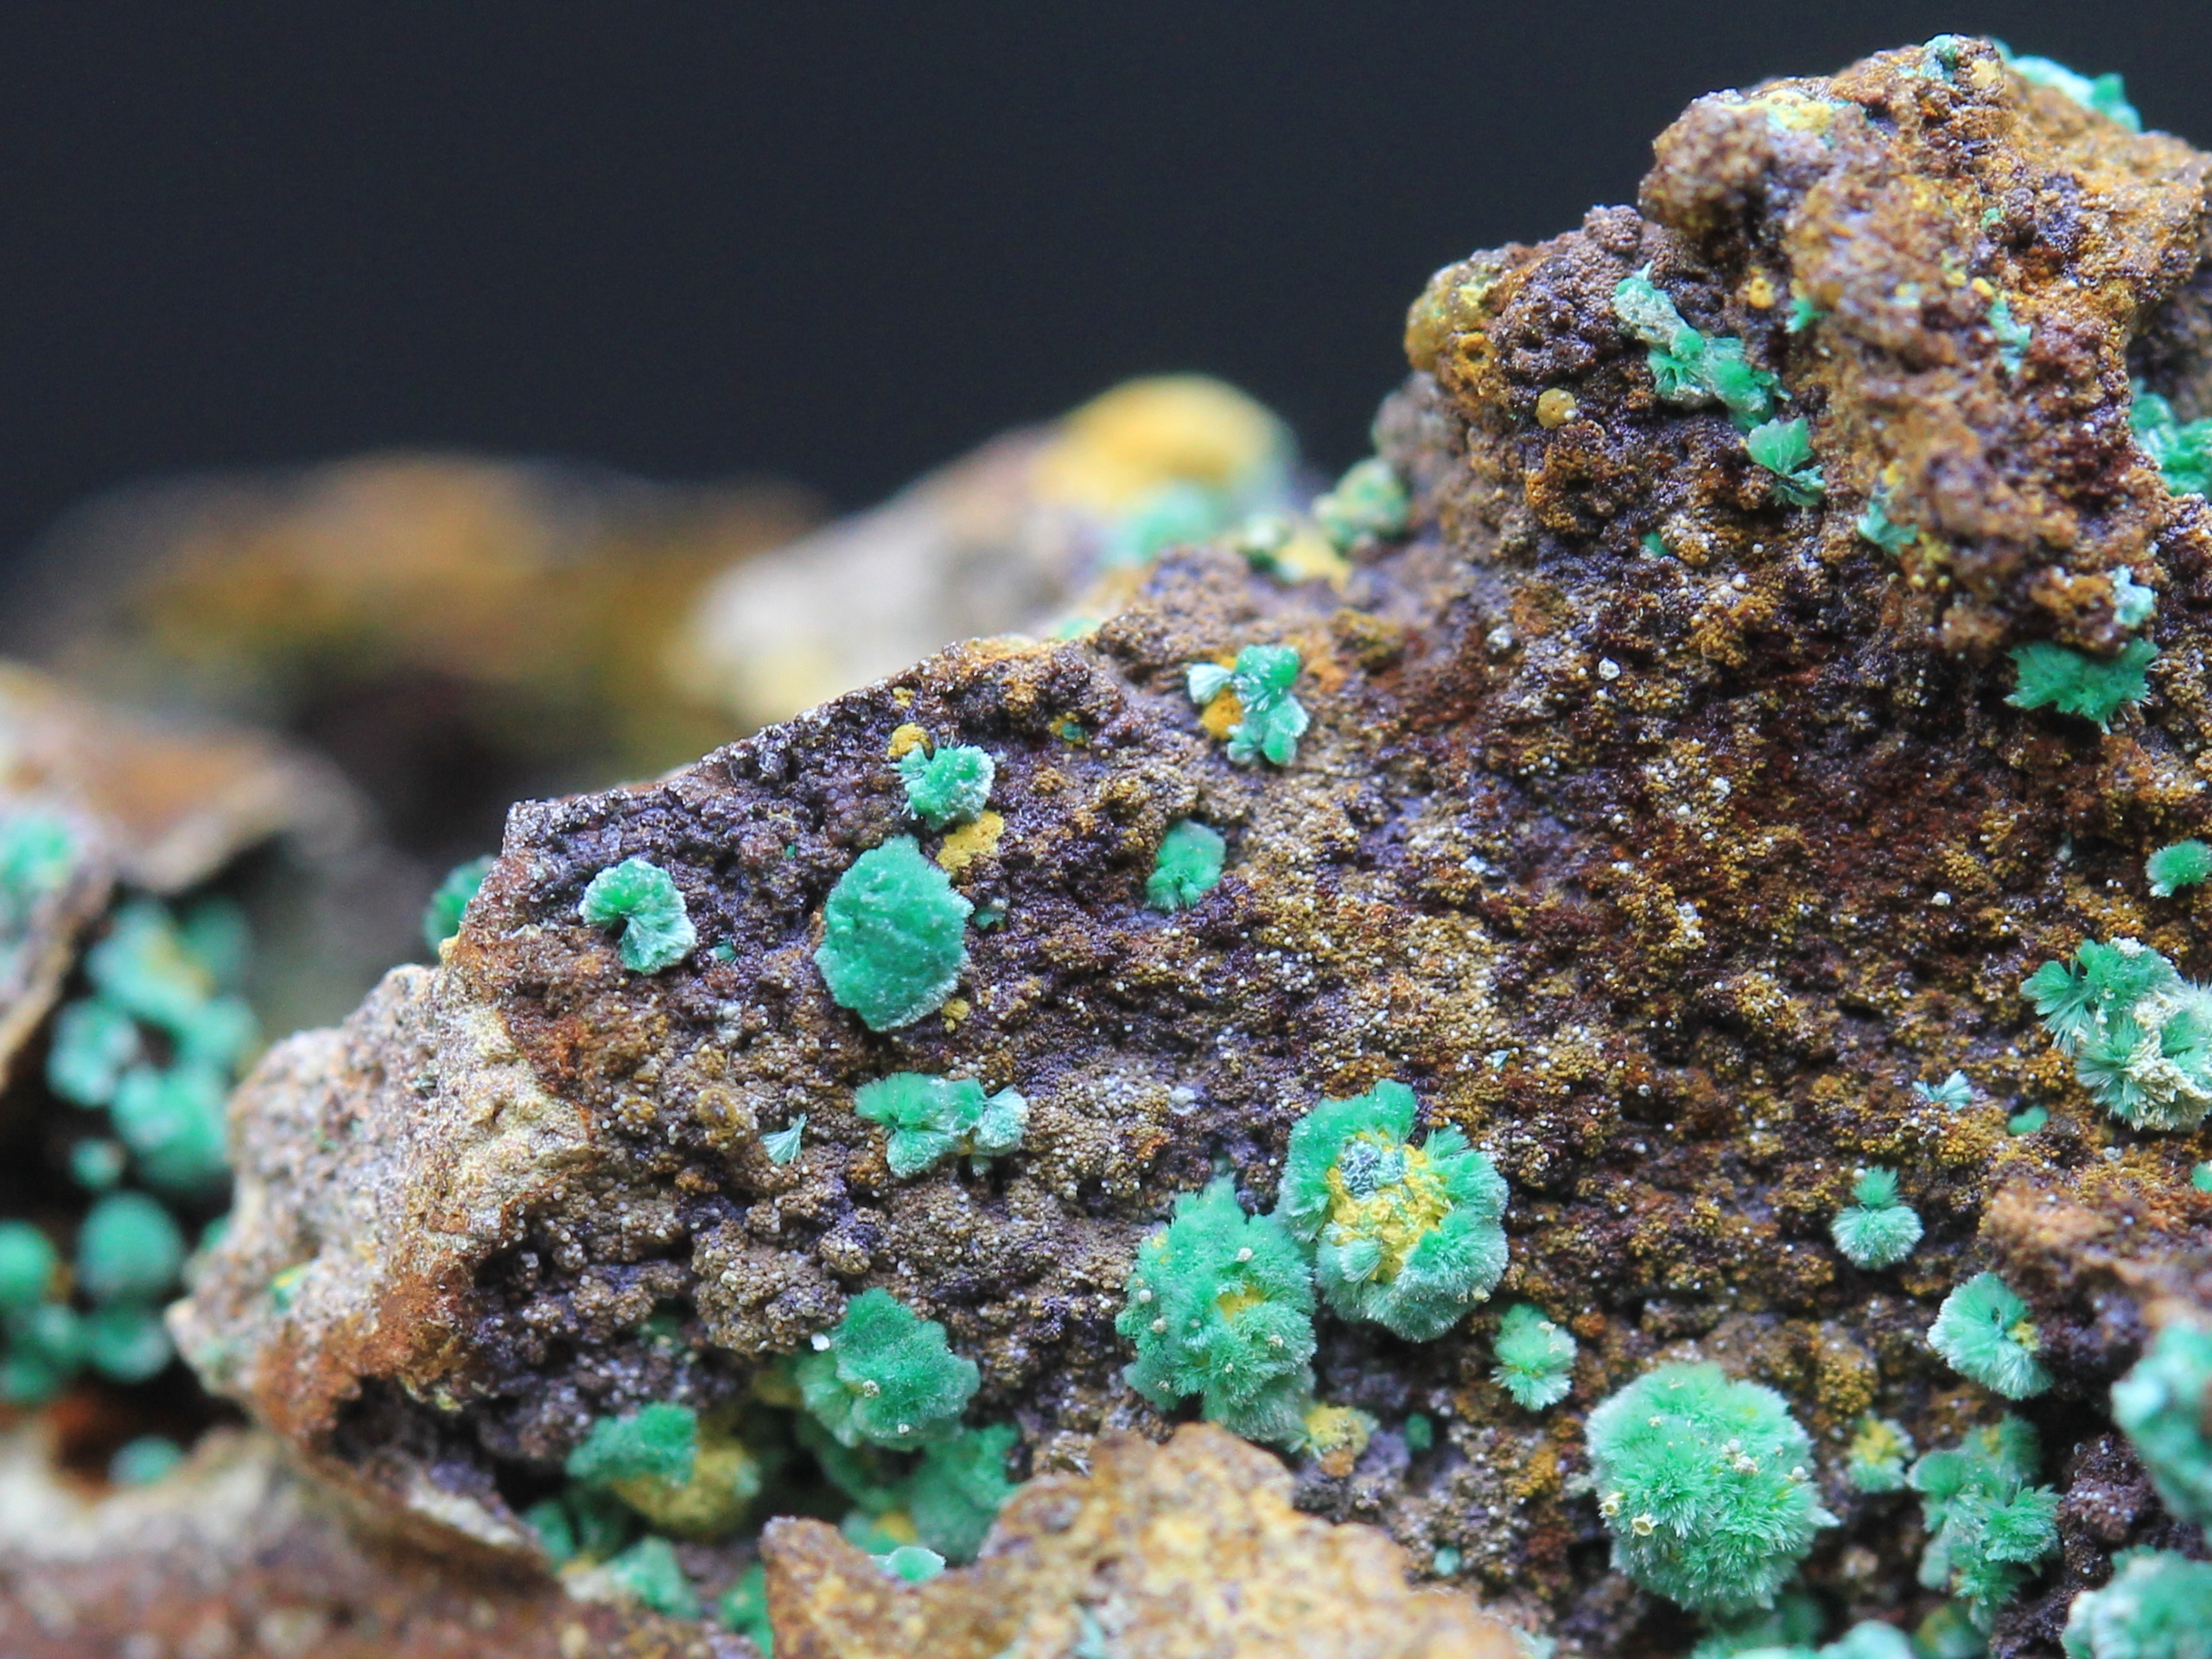 Azurite, malachite, and others (microcrystals Zálesíite ?)